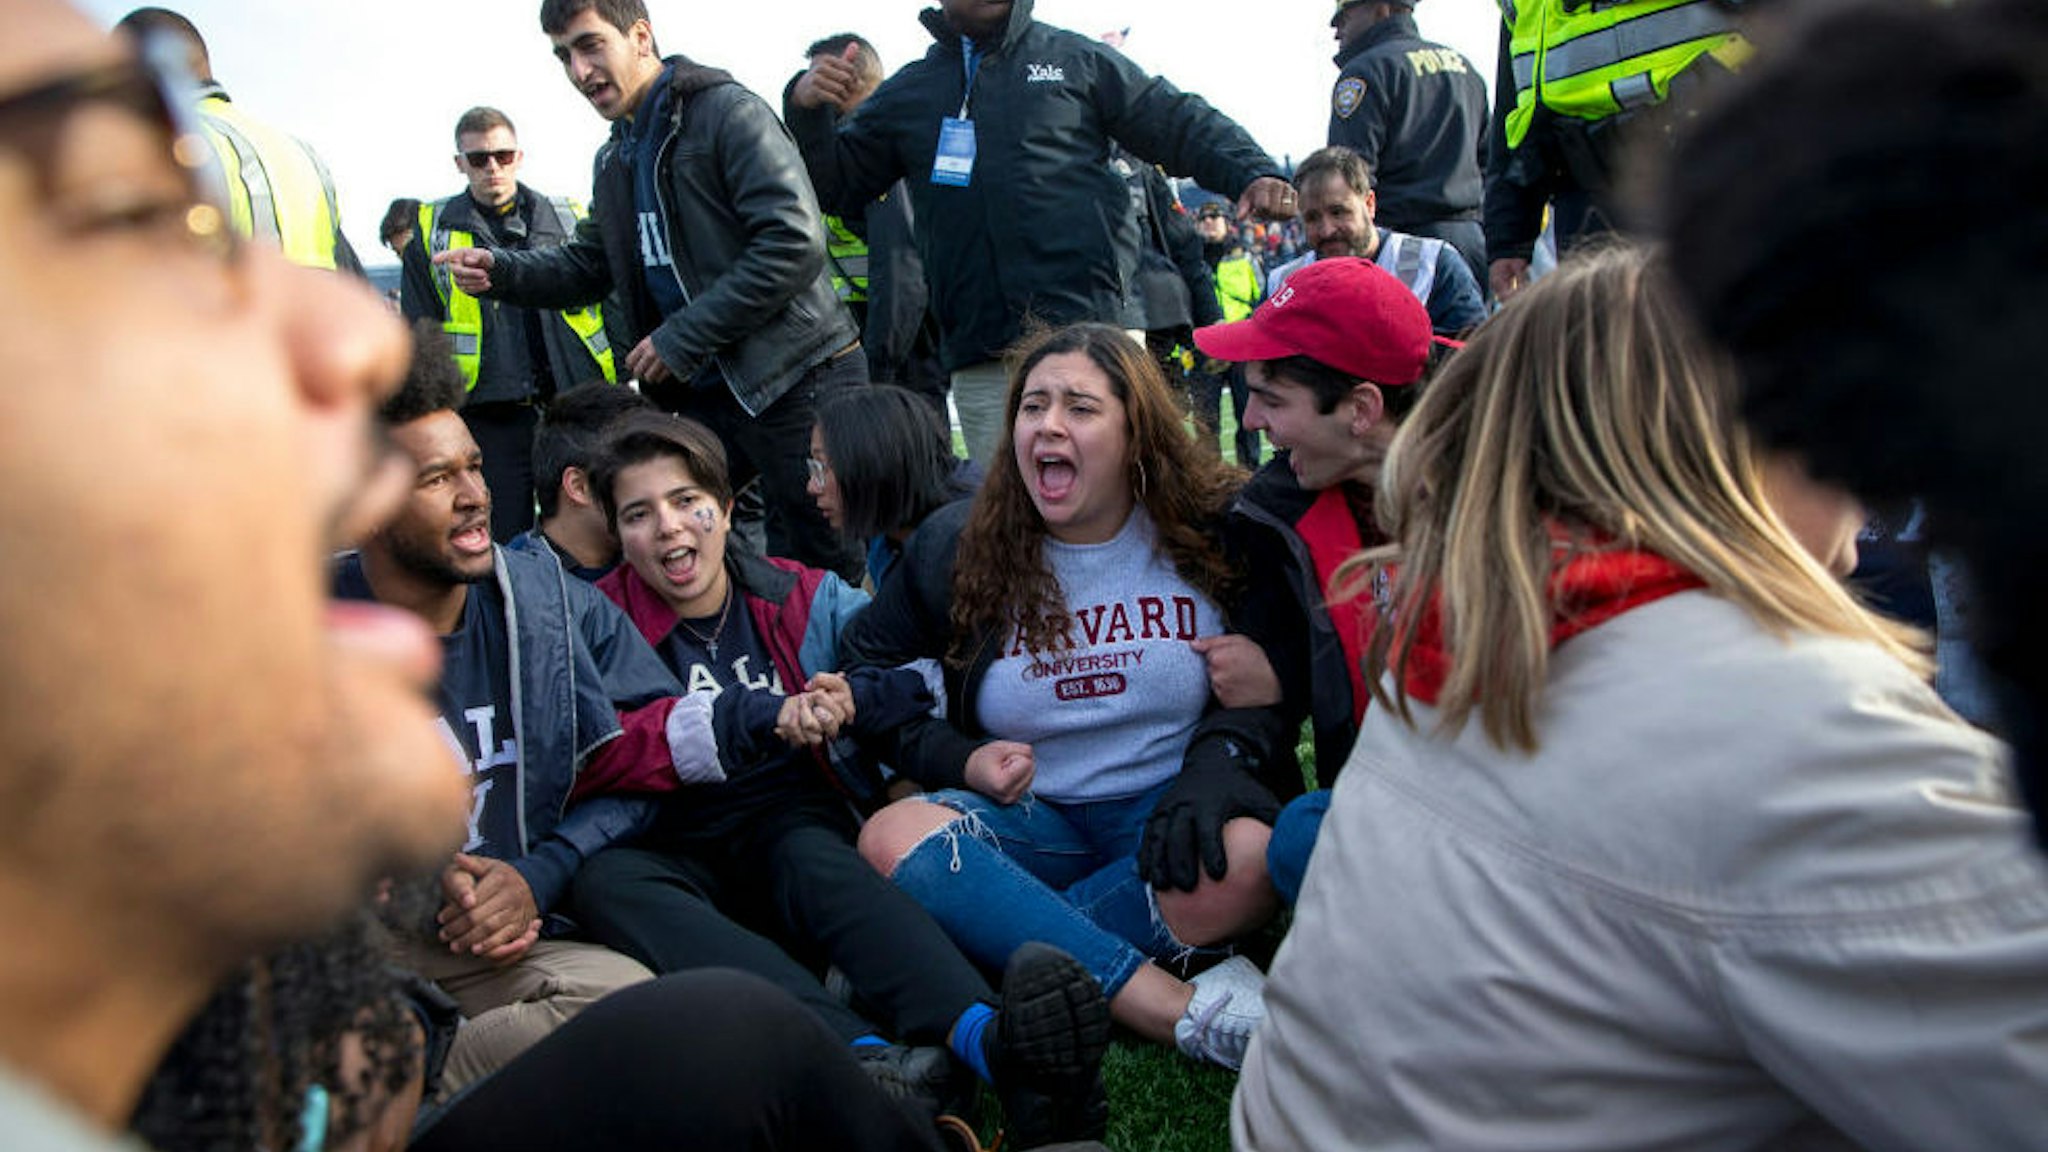 NEW HAVEN, CT - NOVEMBER 23: Harvard and Yale students protest during the halftime of the college football game between Harvard and Yale at the Yale Bowl in New Haven, CT on Saturday, Nov. 23, 2019. Demonstrators stormed the field during halftime at the Harvard-Yale football game Saturday, delaying the game for about an hour to demand that both universities divest their investments in fossil fuels and to call attention to the issue of climate change. The protest, which began with a few dozen protesters staging a sit-in midfield as the Yale band finished its halftime routine, swelled to about 500 people at one point as others in the stands joined the demonstration.